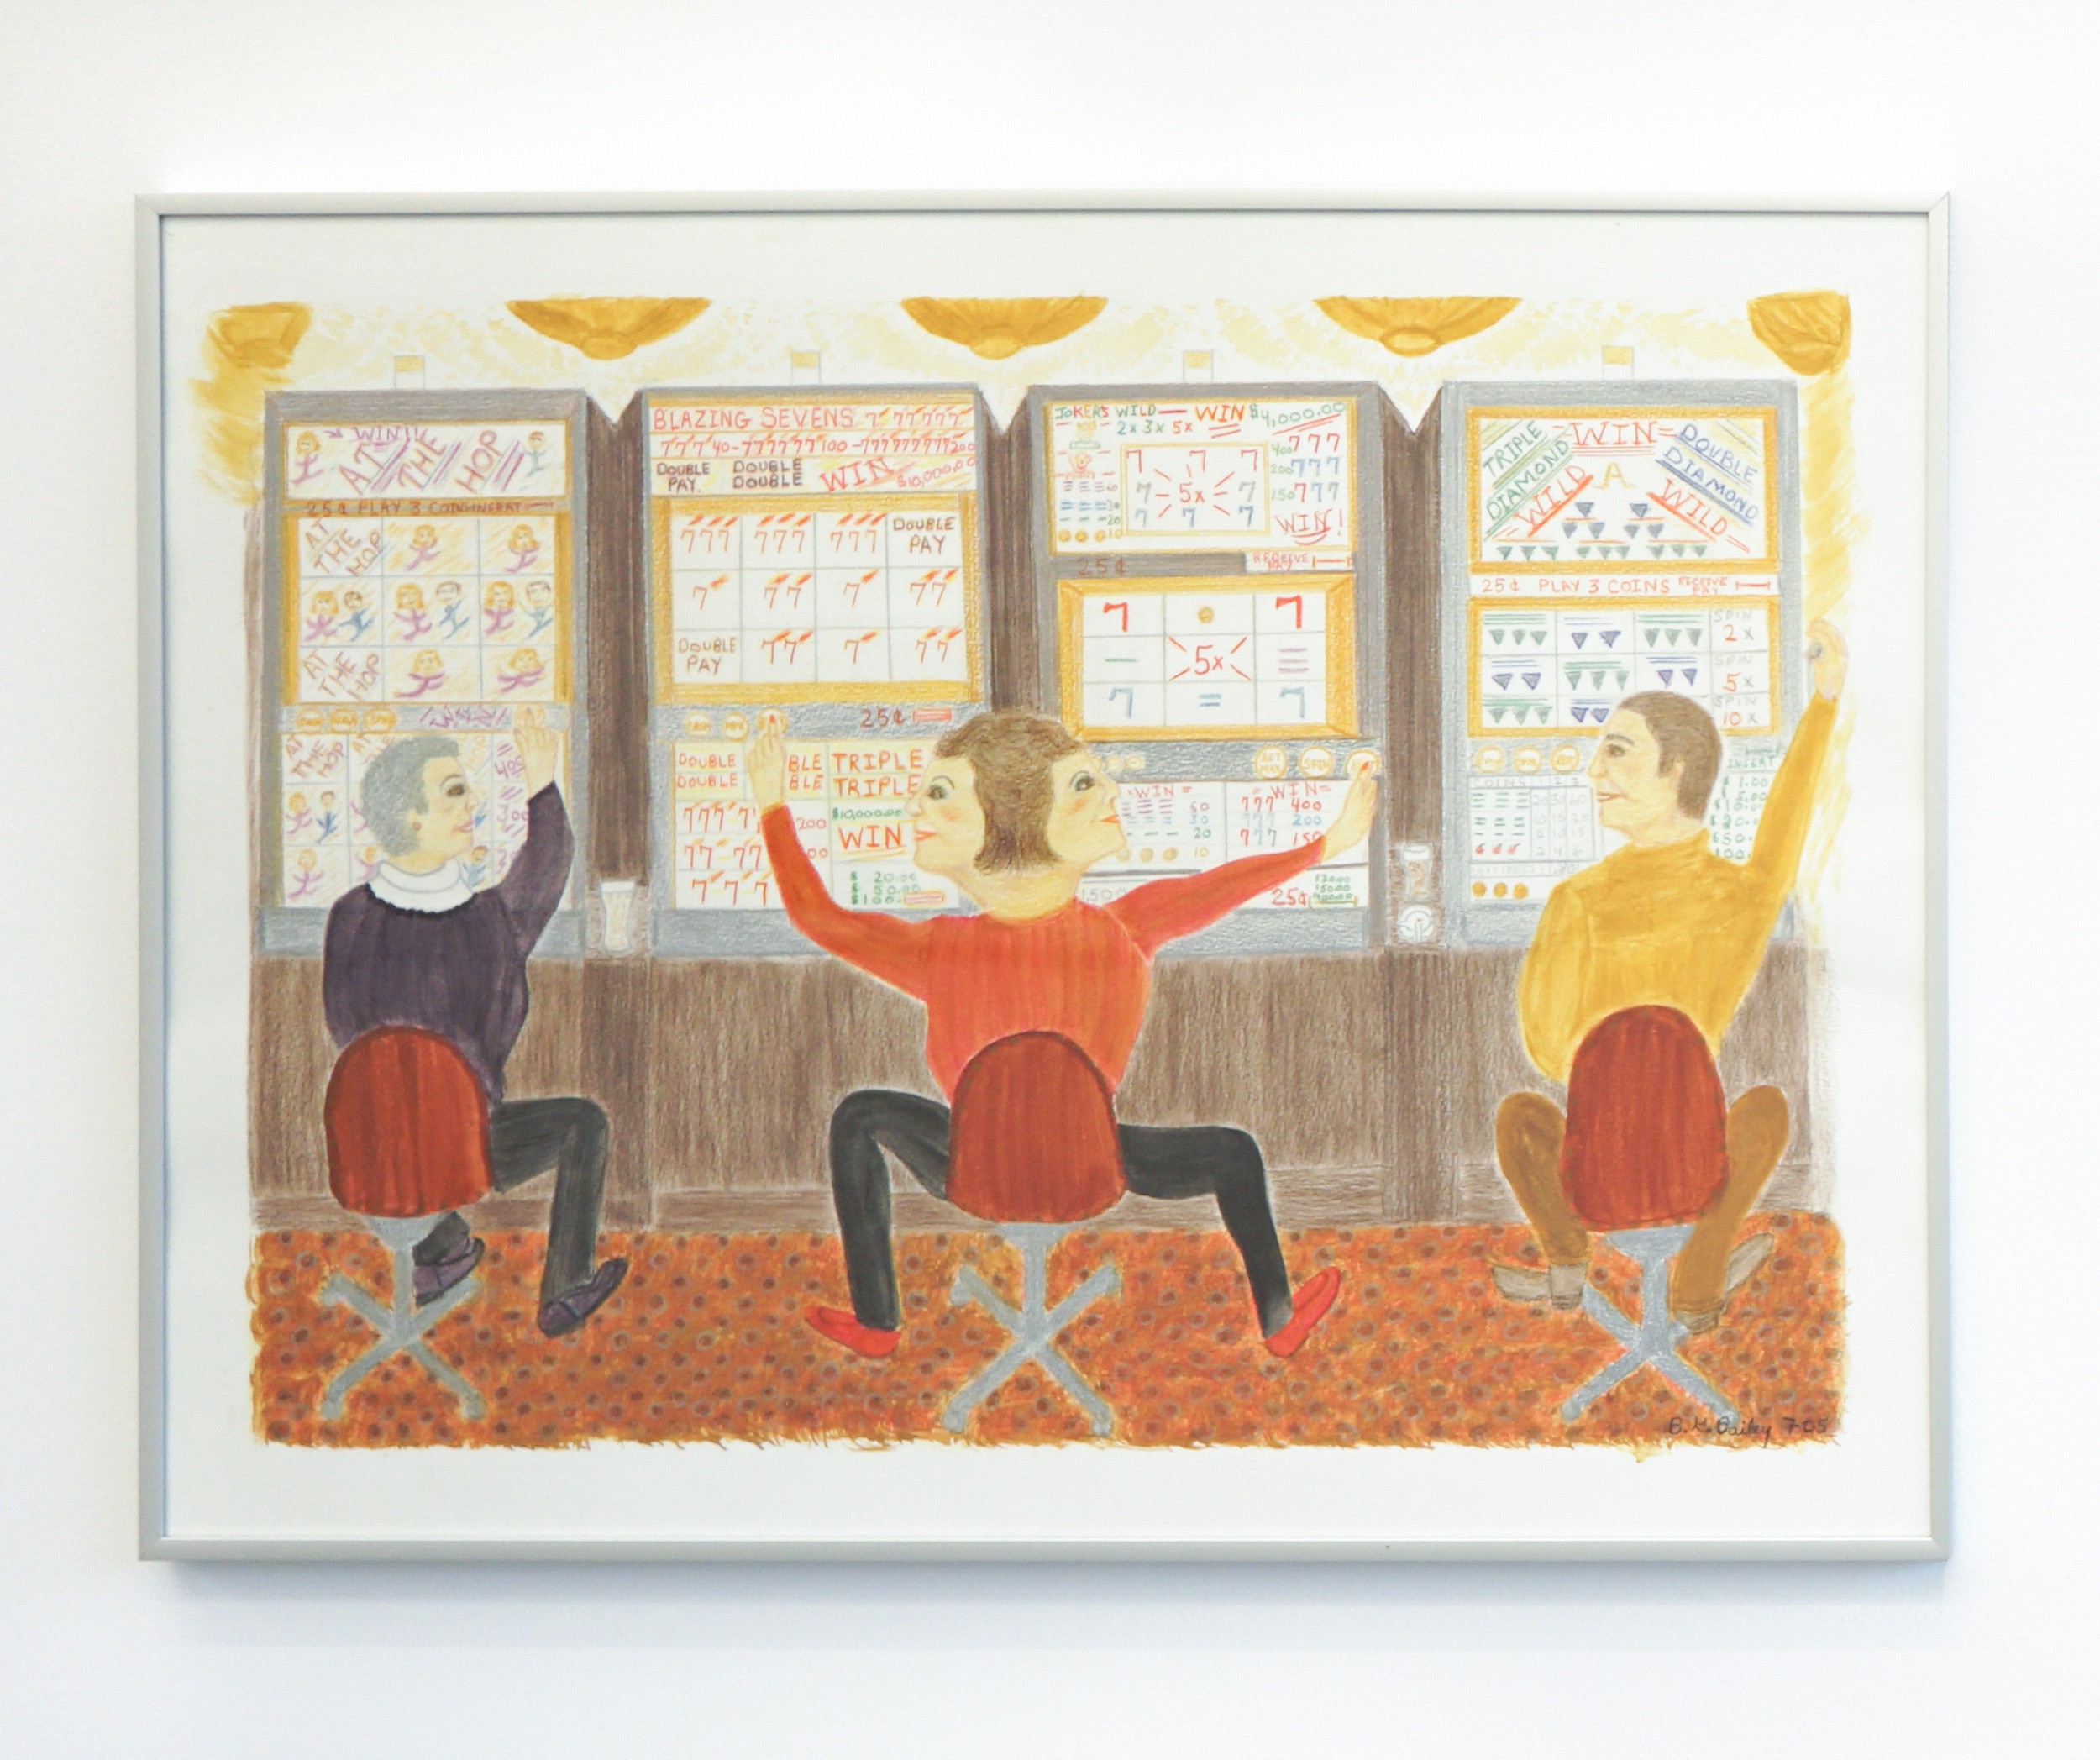  Betty Bailey  Playing the Slots , 2005 Colored pencil and gouache on paper 18 x 24 inches 